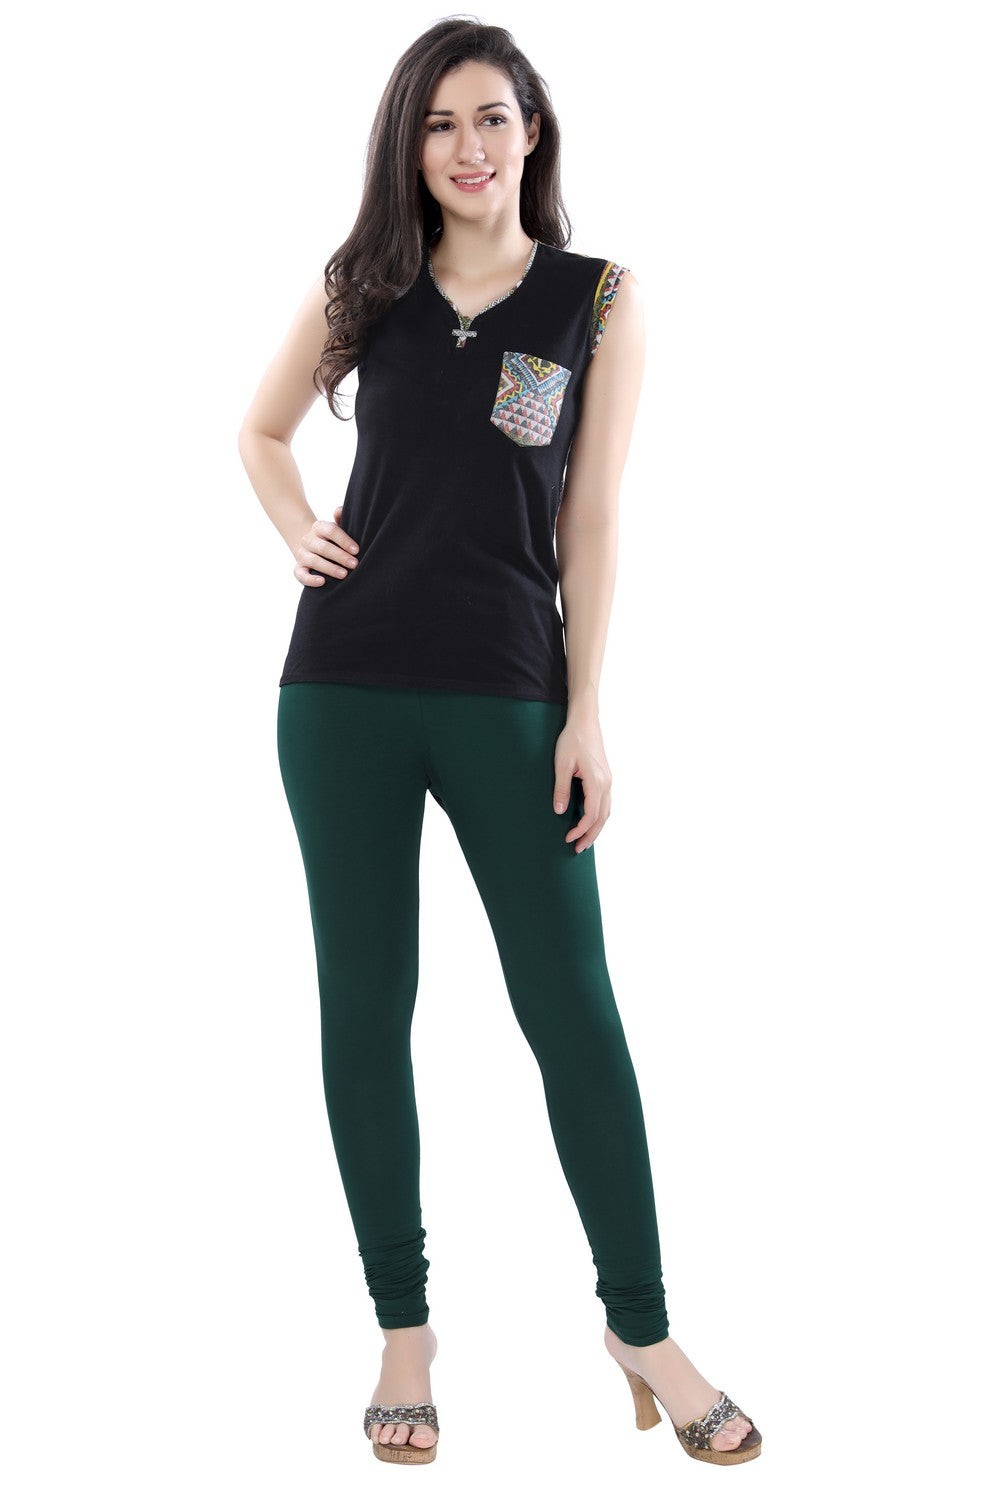 Buy Snug Fit High Rise Active Tights in Forest Green with Side Pockets  Online India, Best Prices, COD - Clovia - AB0048A17